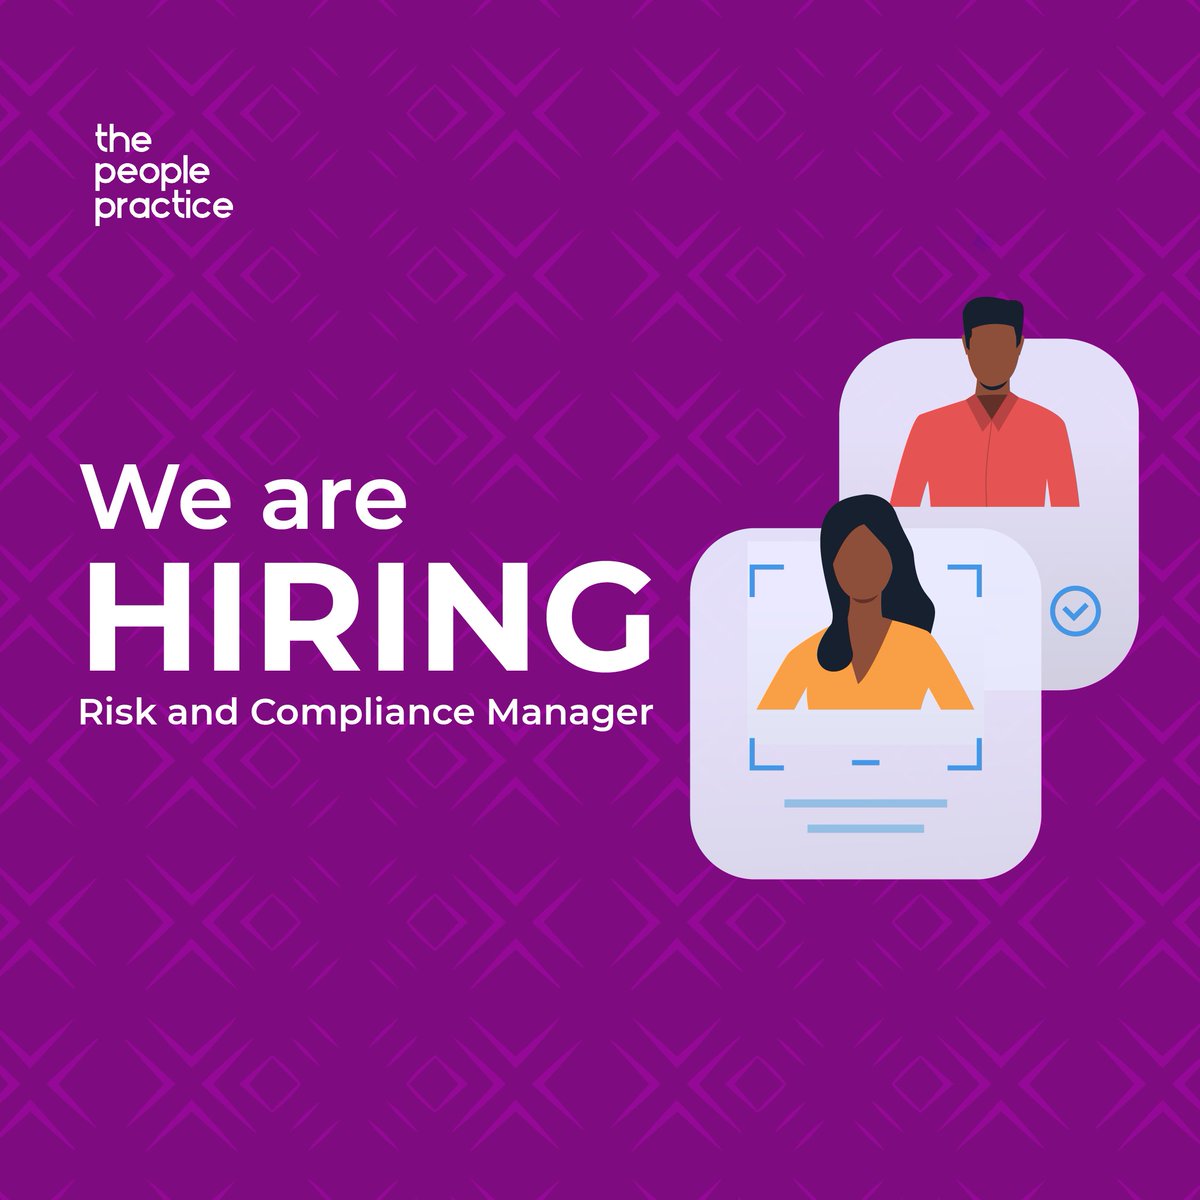 #Vacancy 

Are you a Risk and Compliance Manager with 5 years experience? Are you based in Lagos? 

For an opportunity to work at a PropertyTech company, apply here: bit.ly/2U7rwPN

#riskmanagement #internalaudit